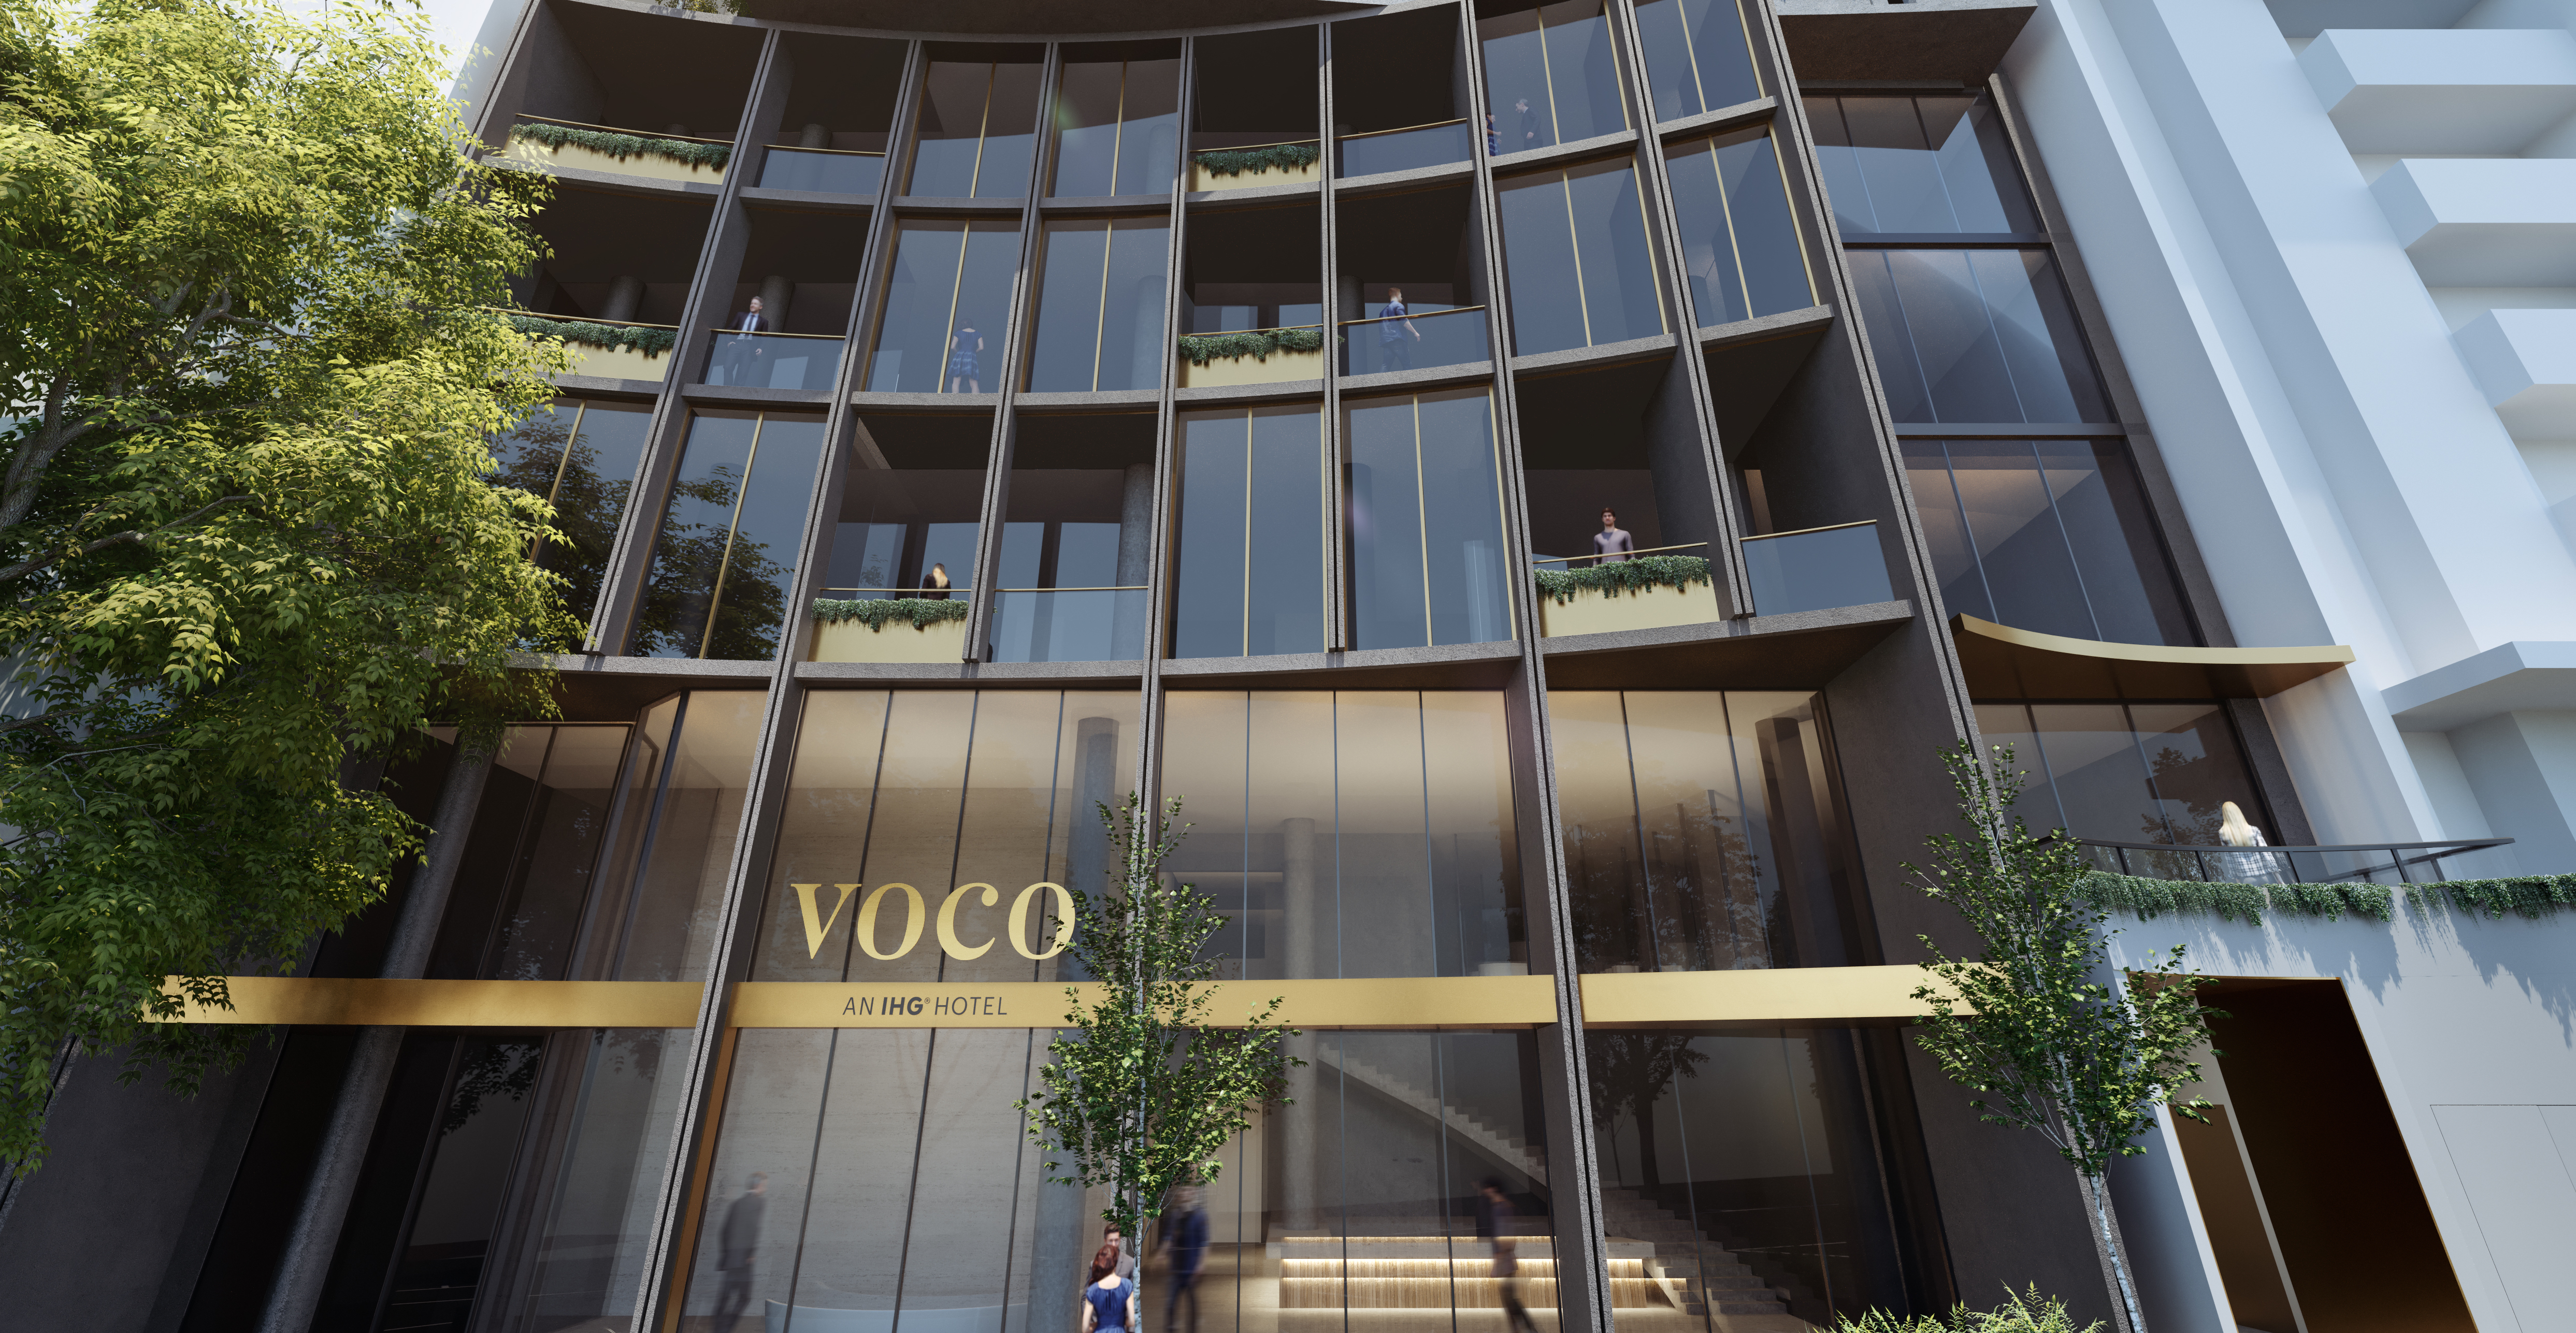 IHG grows pipeline for Voco brand with new-build Melbourne hotel – The